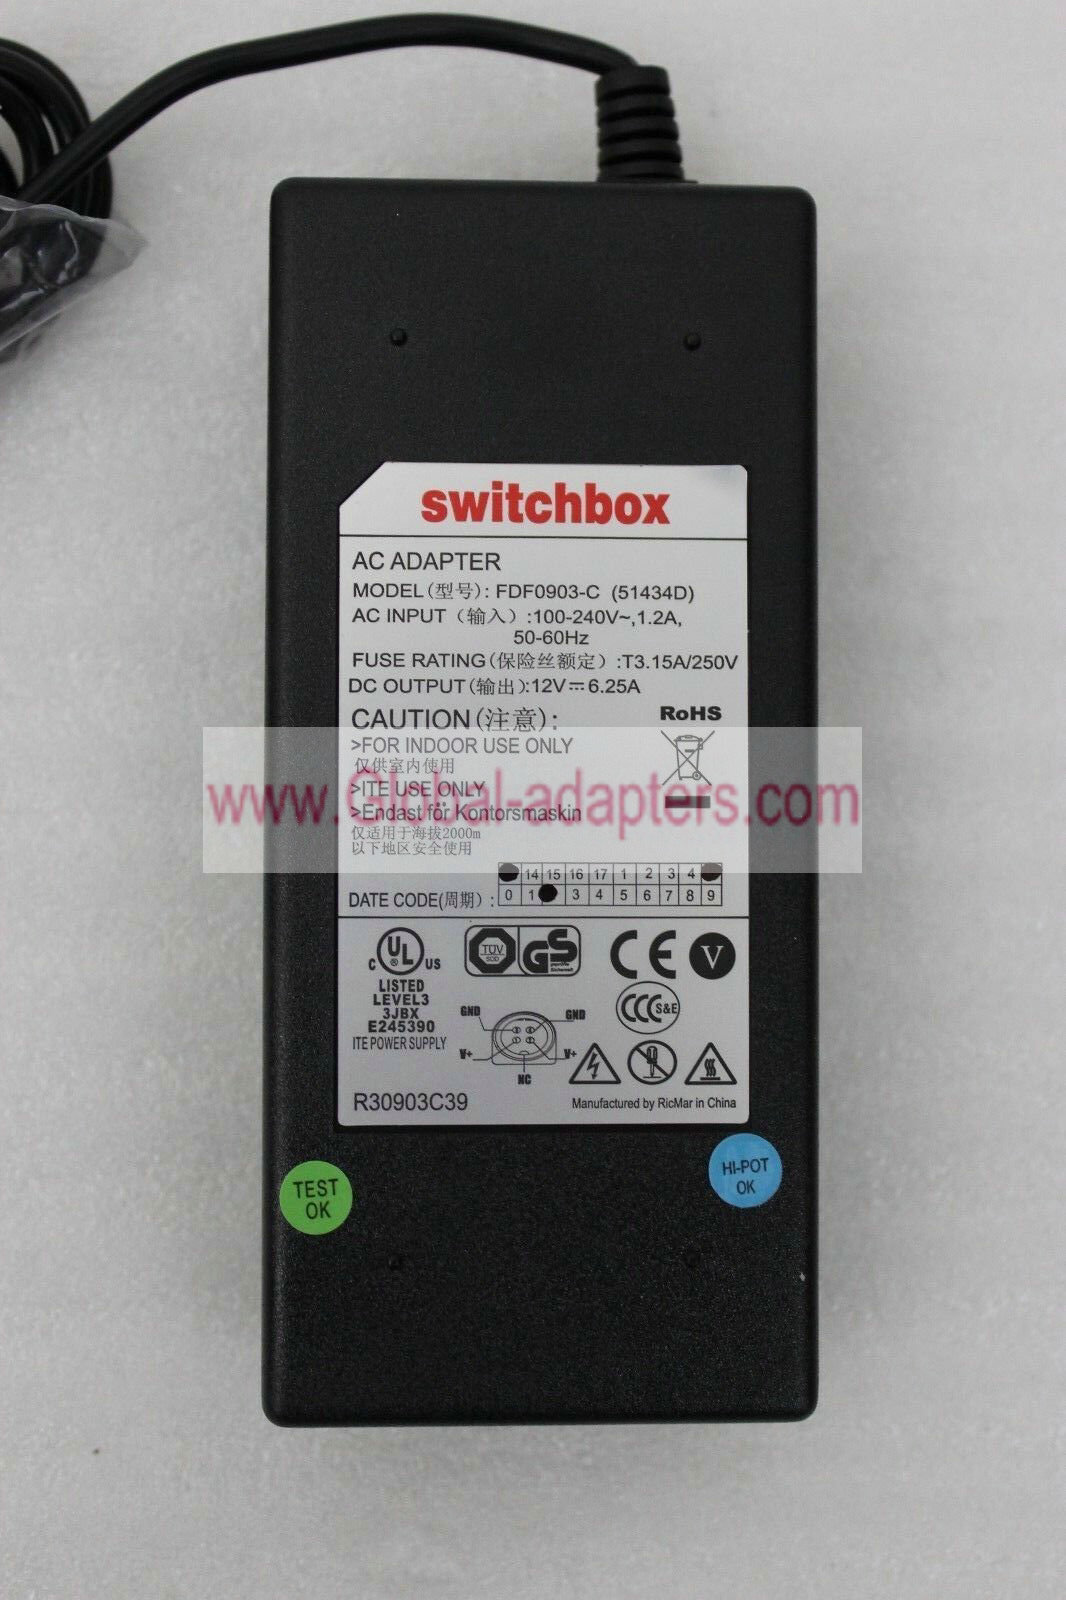 New Switchbox AC Adapter FDF0903-C(51434D) 12V 6.25A POWER SUPPLY 4PIN - Click Image to Close